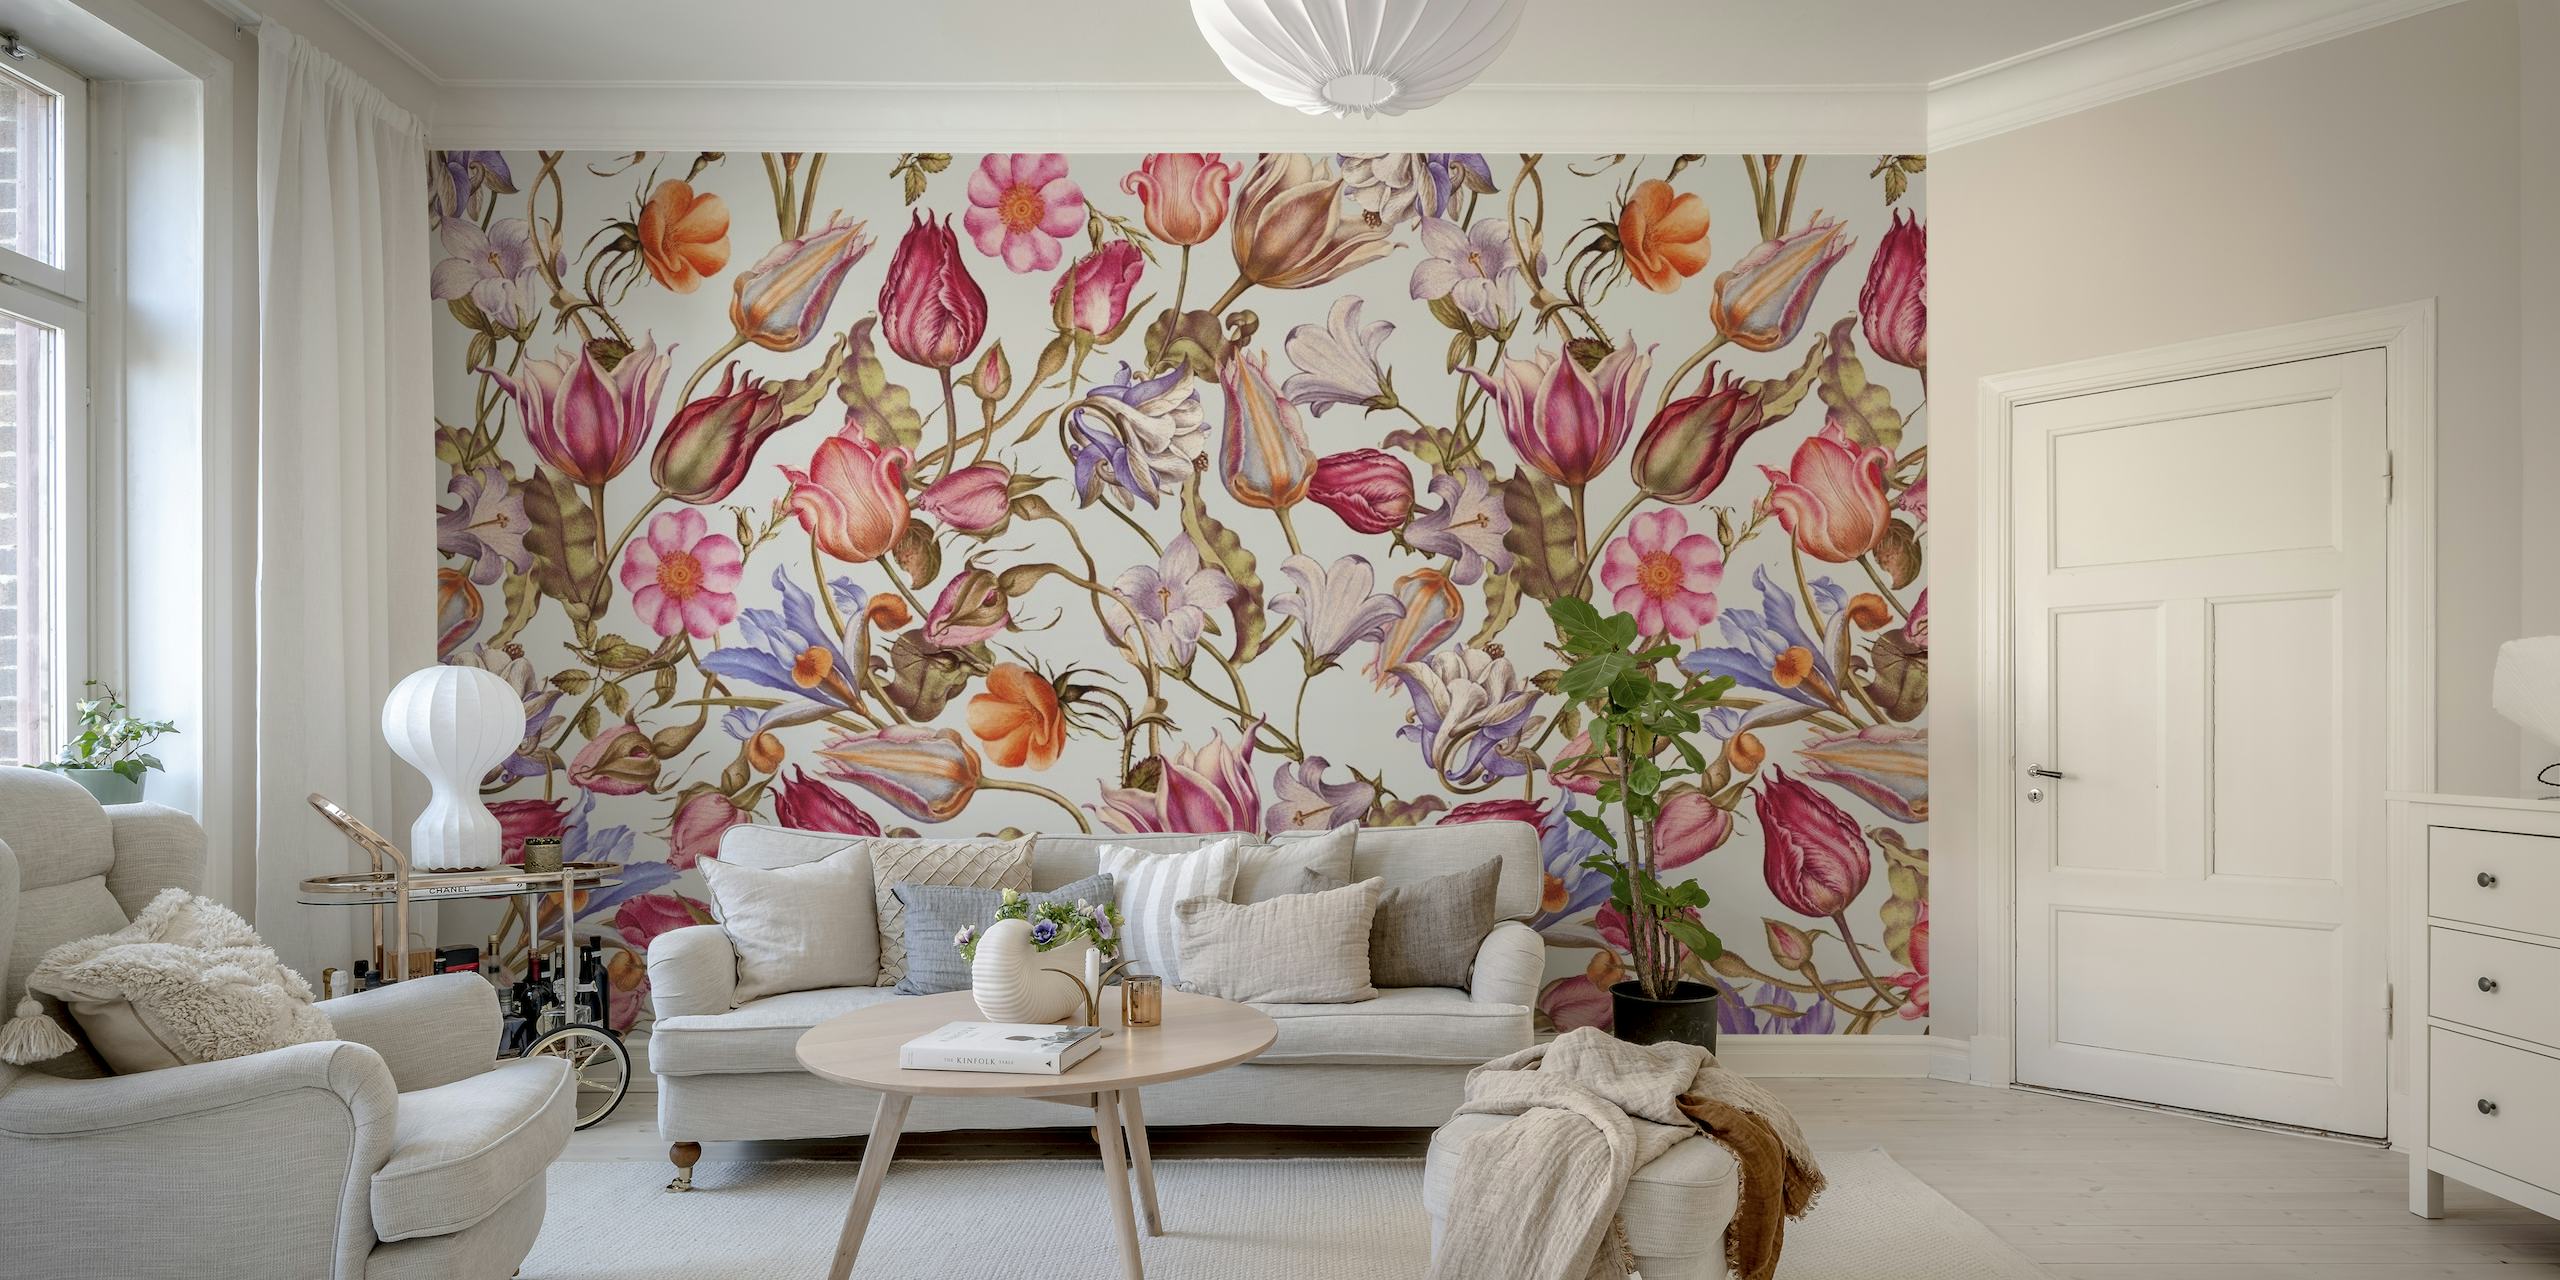 Floral wall mural with summer garden flowers in shades of pink, orange, and purple